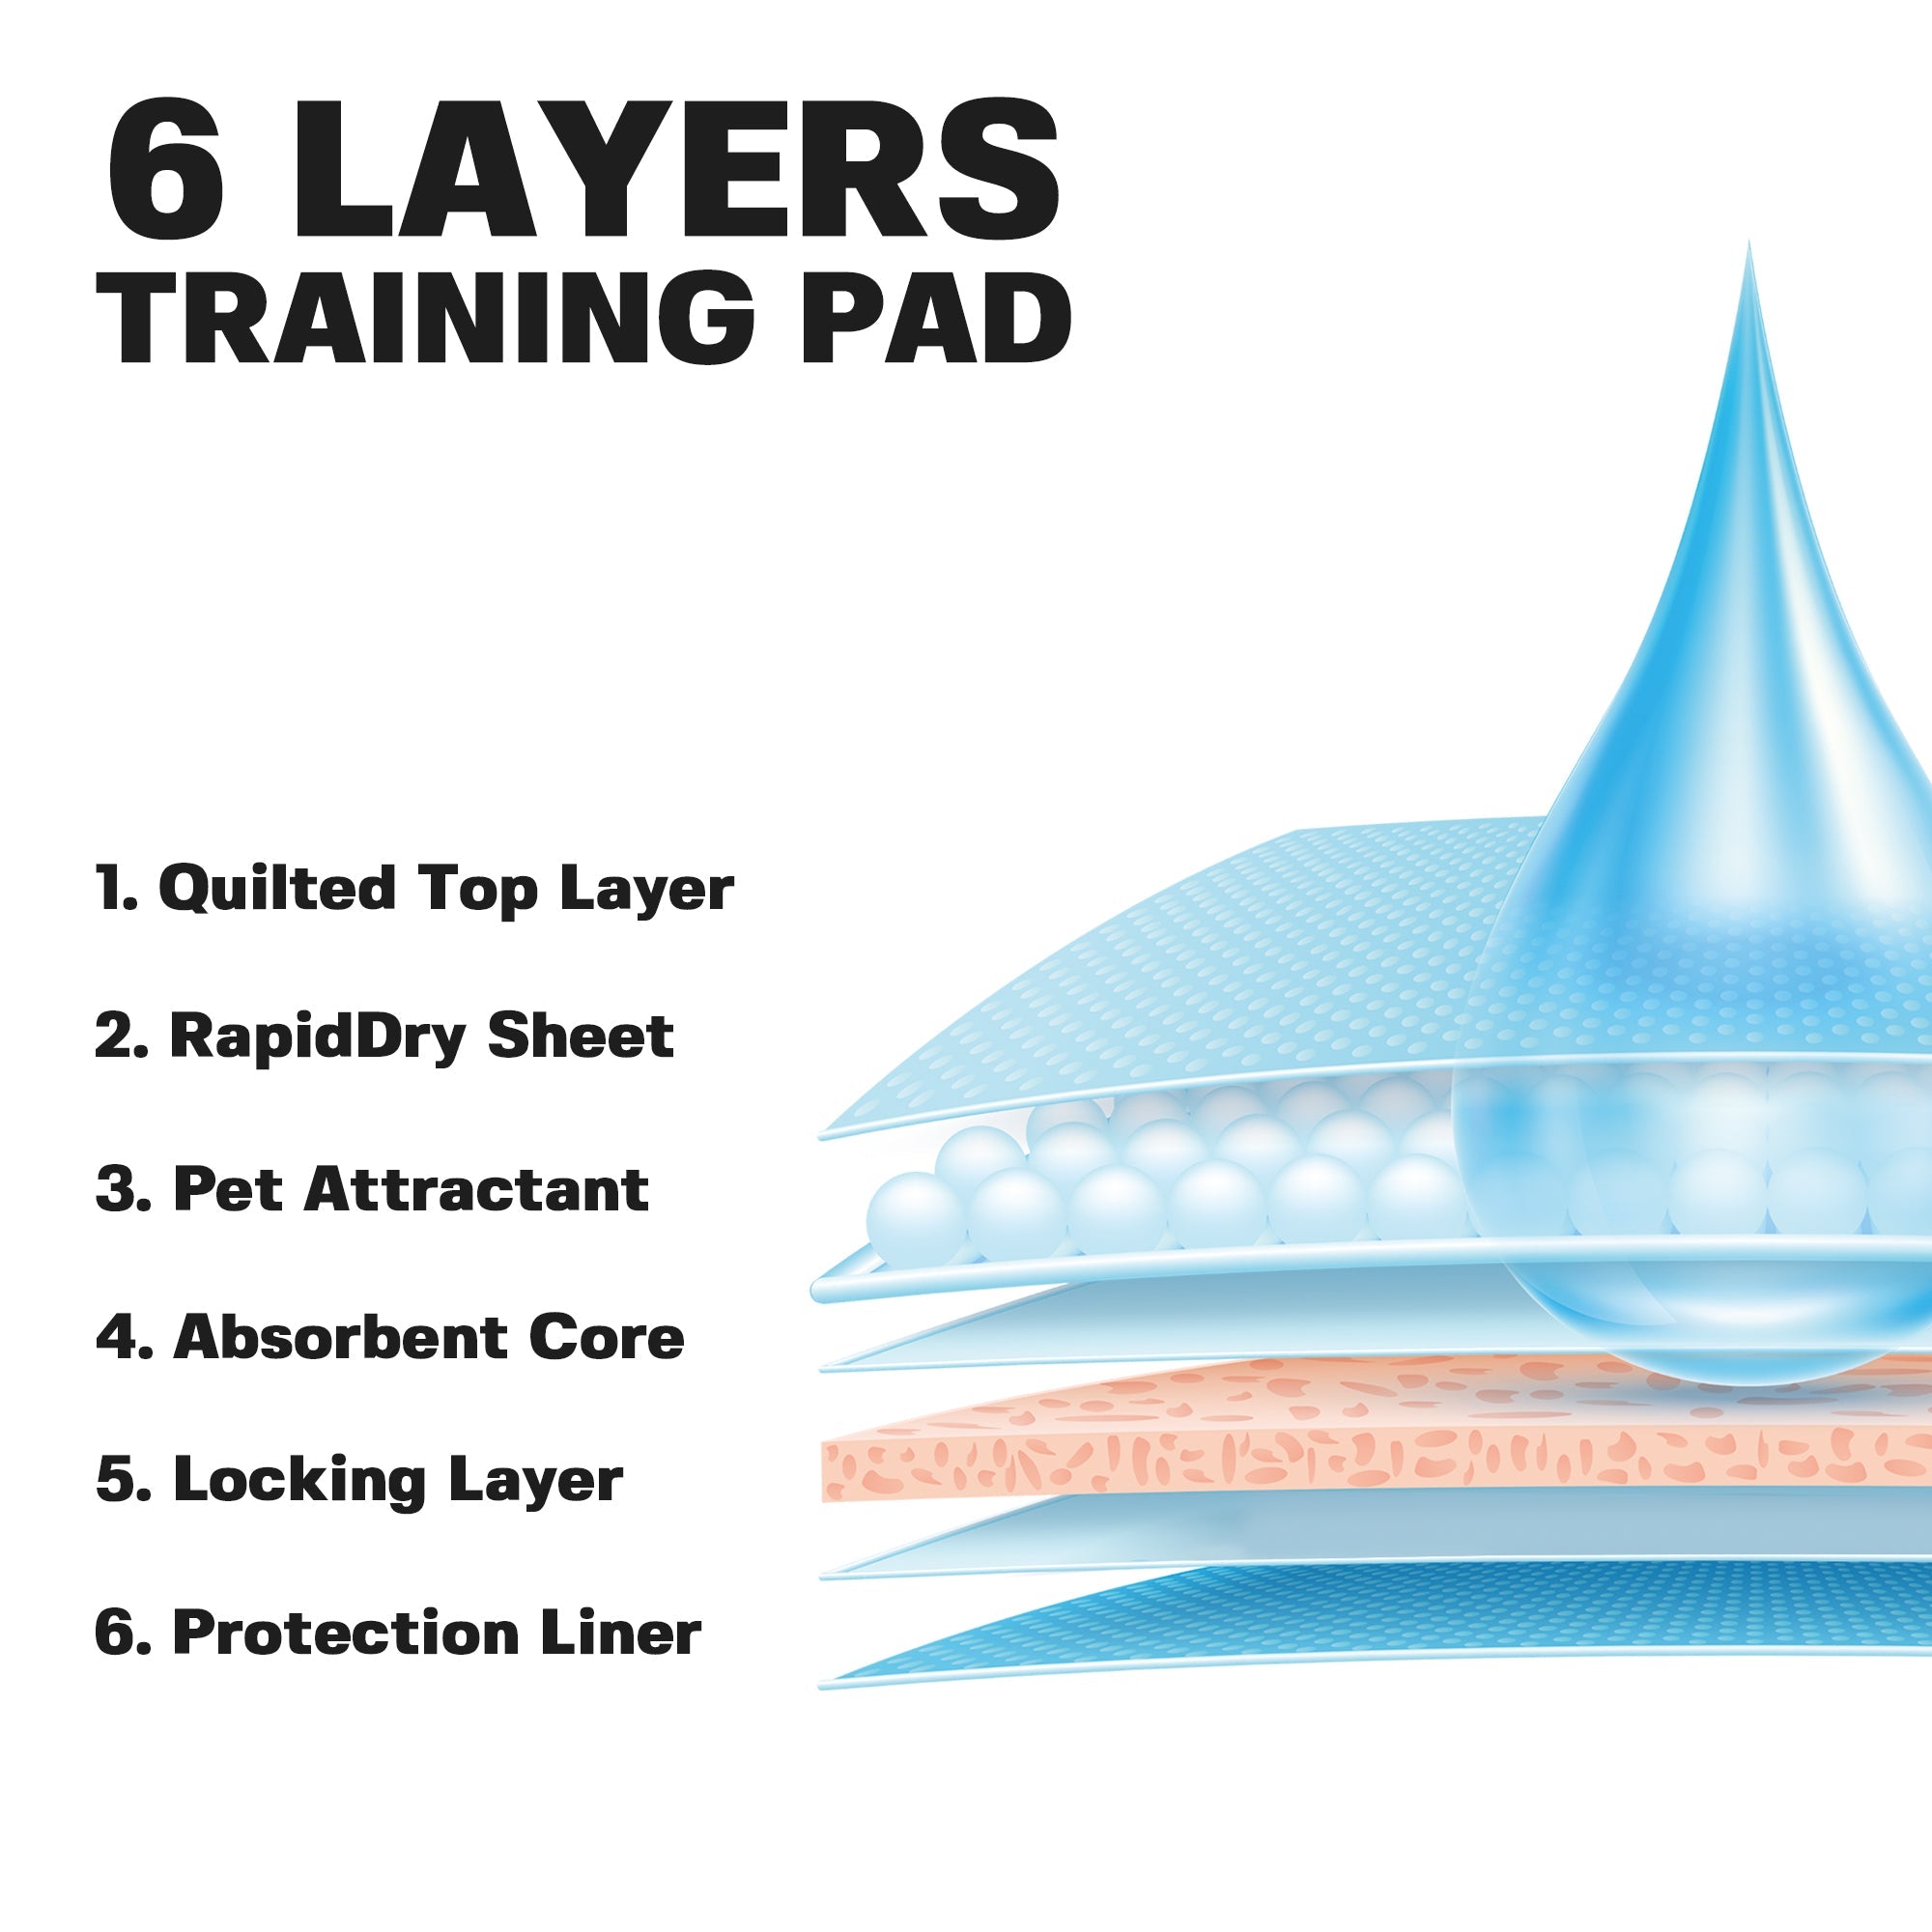 Training Pad Uses 6 Different Layers